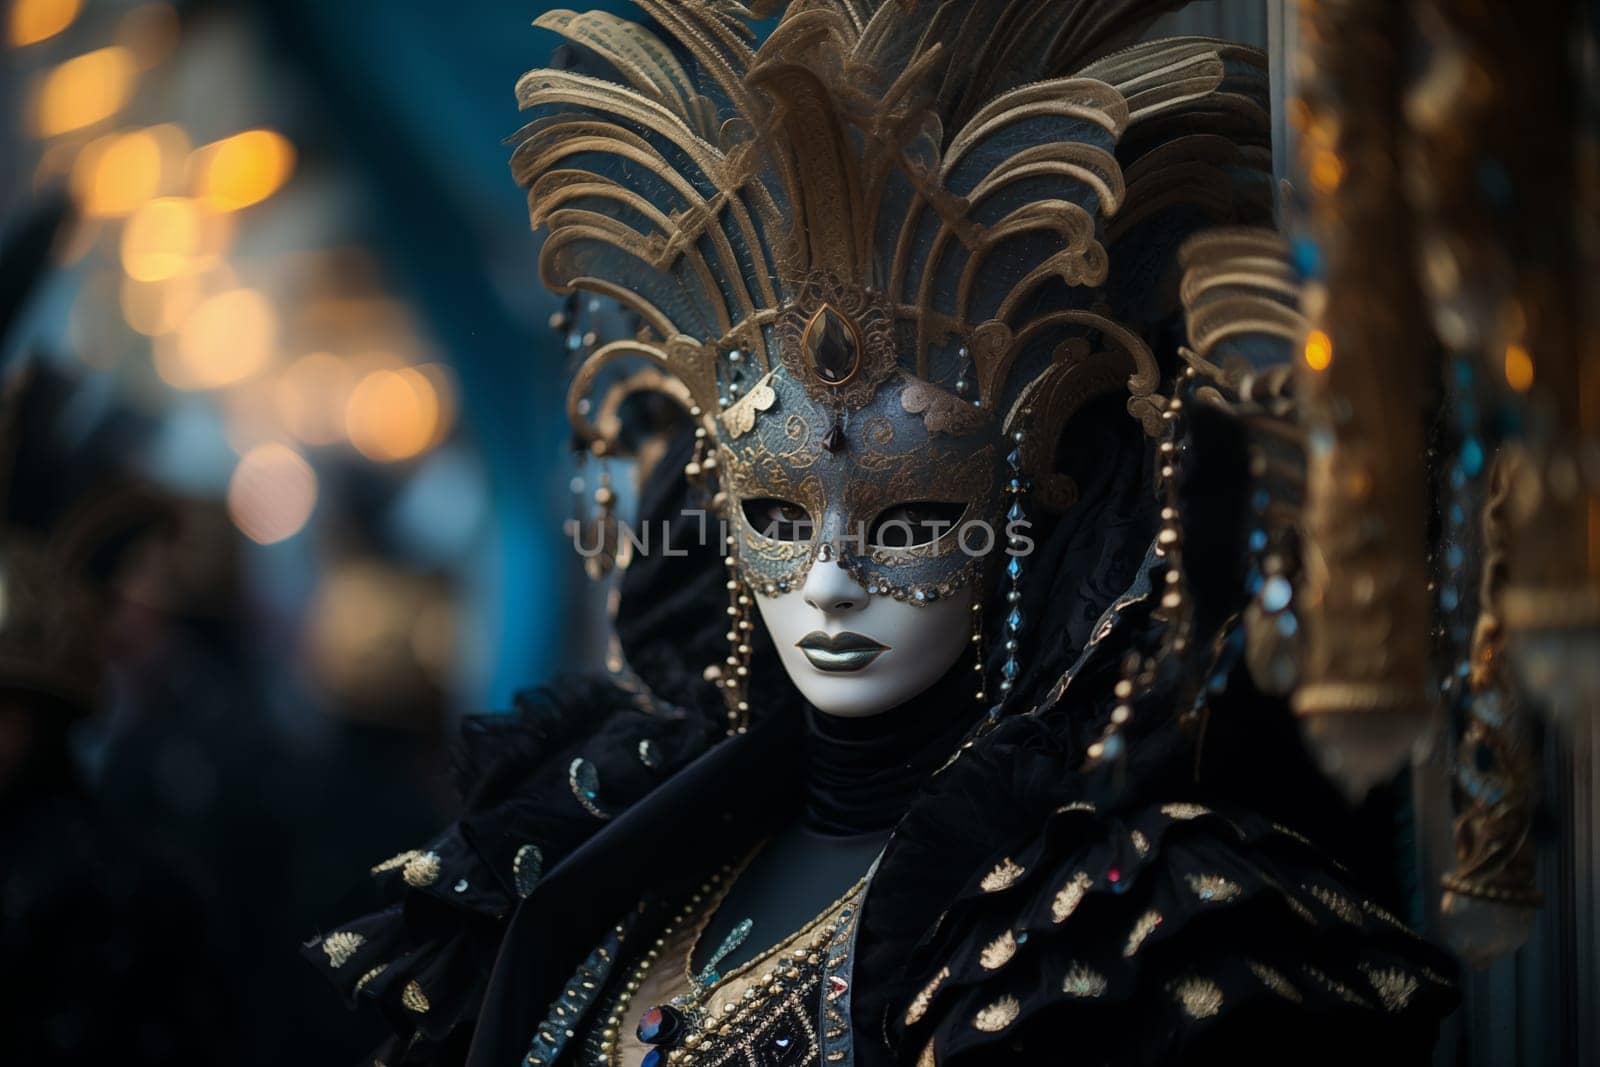 A person adorned in a richly detailed mask and costume, capturing the essence of the Venice Carnival’s grandeur and mystery